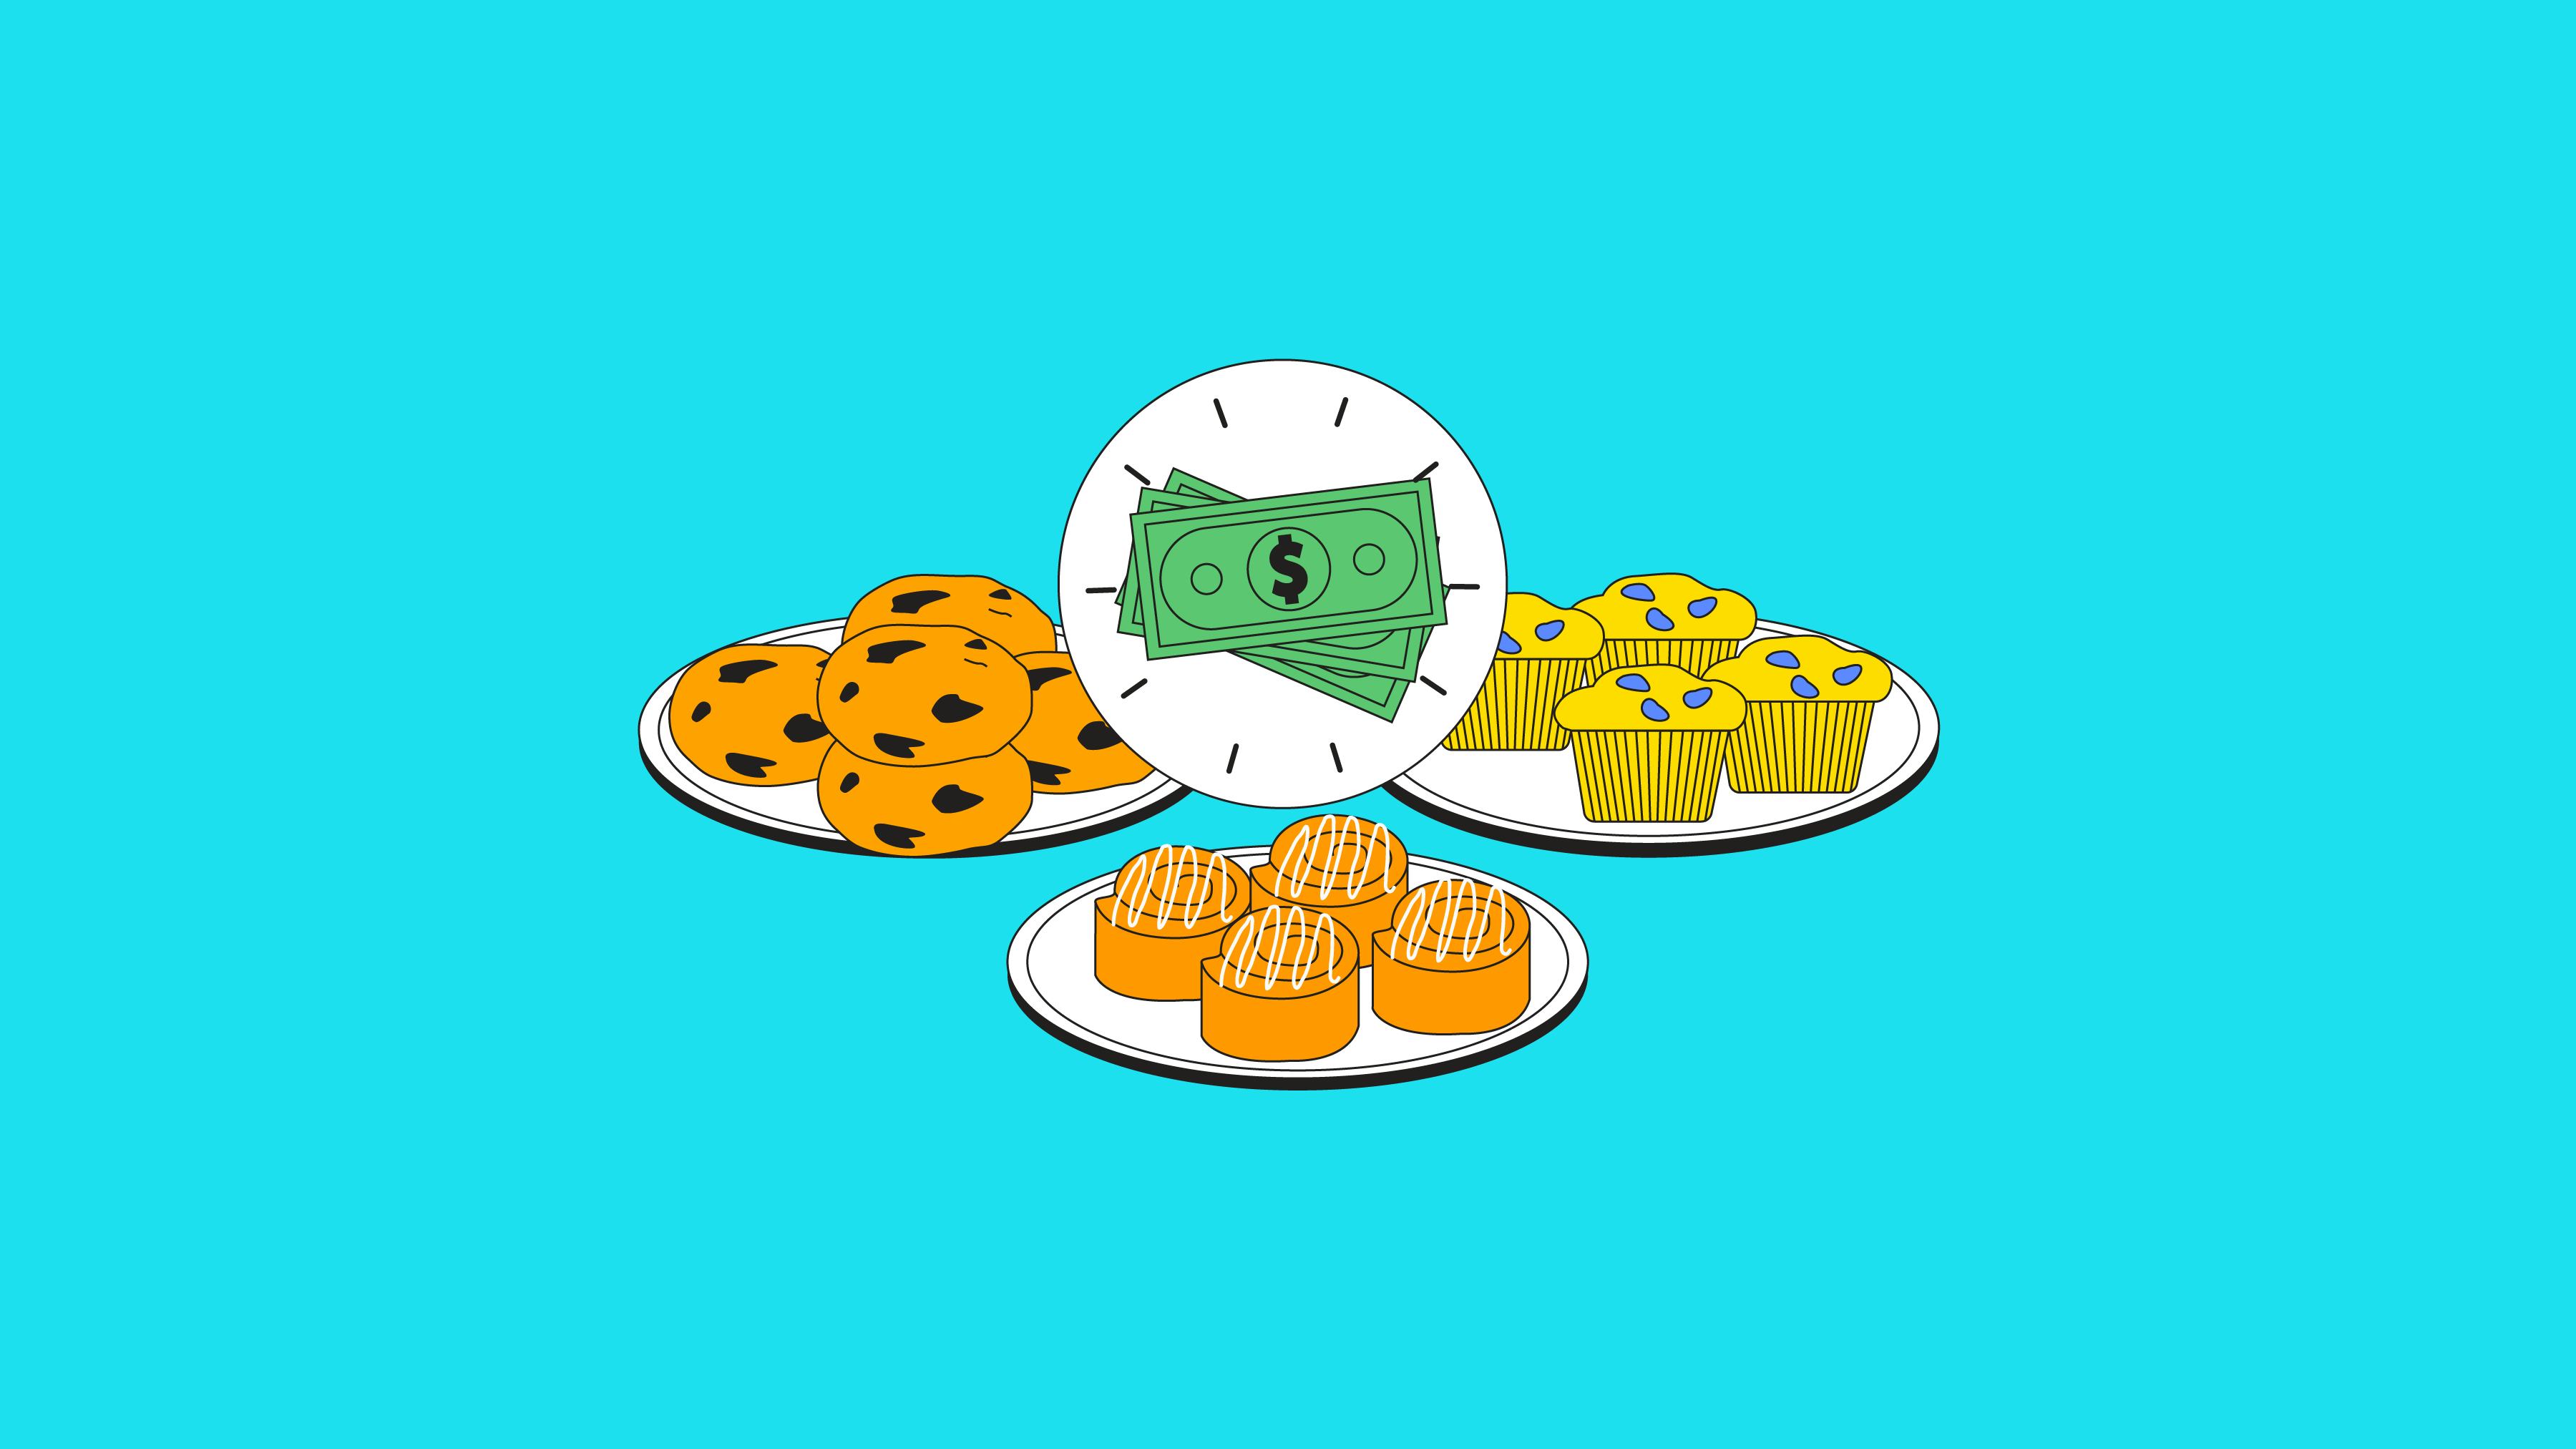 How To Run A Successful Bake Sale Fundraiser With Braid Money Pools